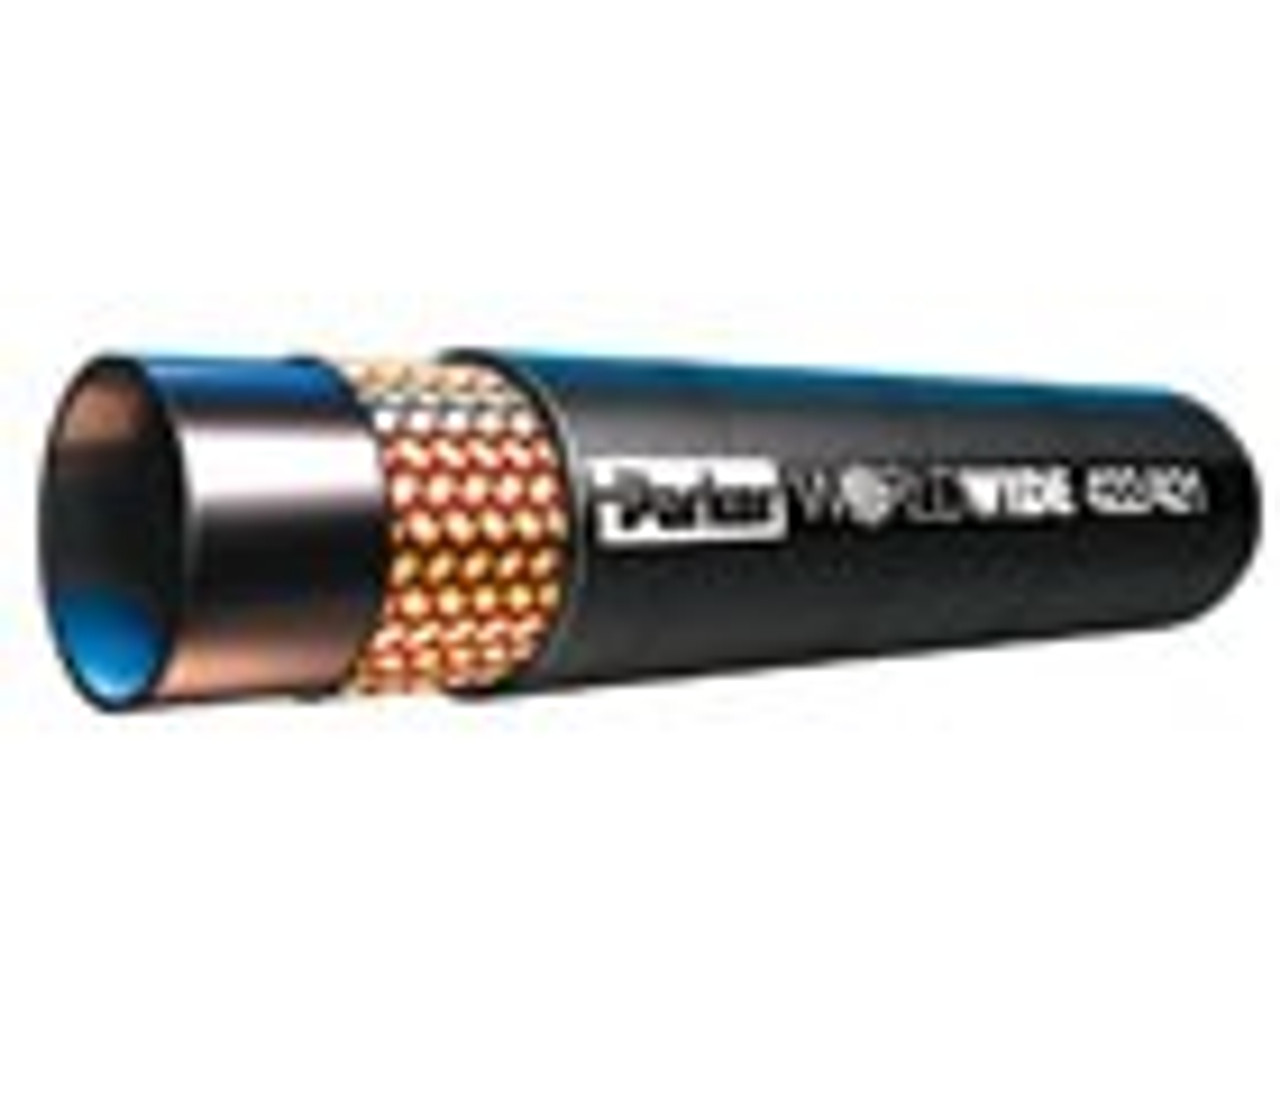 Parker 351St-6-Rl 3/8" Id Hydraulic Hose Supertough Cover With Black Layline 4000Psi (276Bar) 2 Wire Braids Temp Range Degrees F: (-40/+212) Sae 100R19